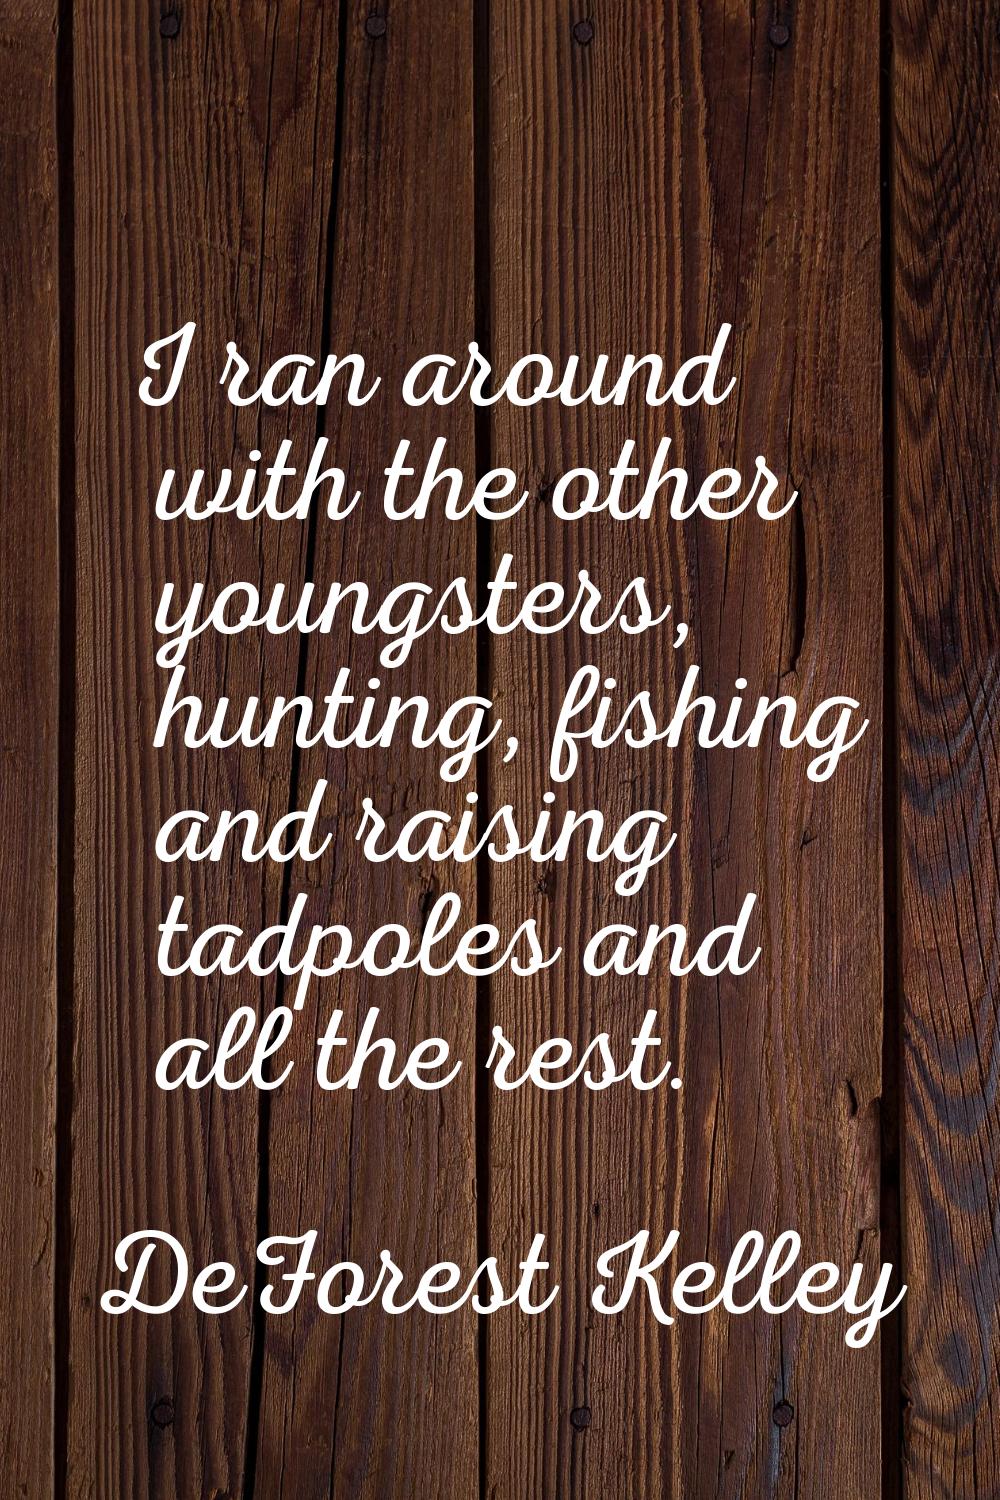 I ran around with the other youngsters, hunting, fishing and raising tadpoles and all the rest.